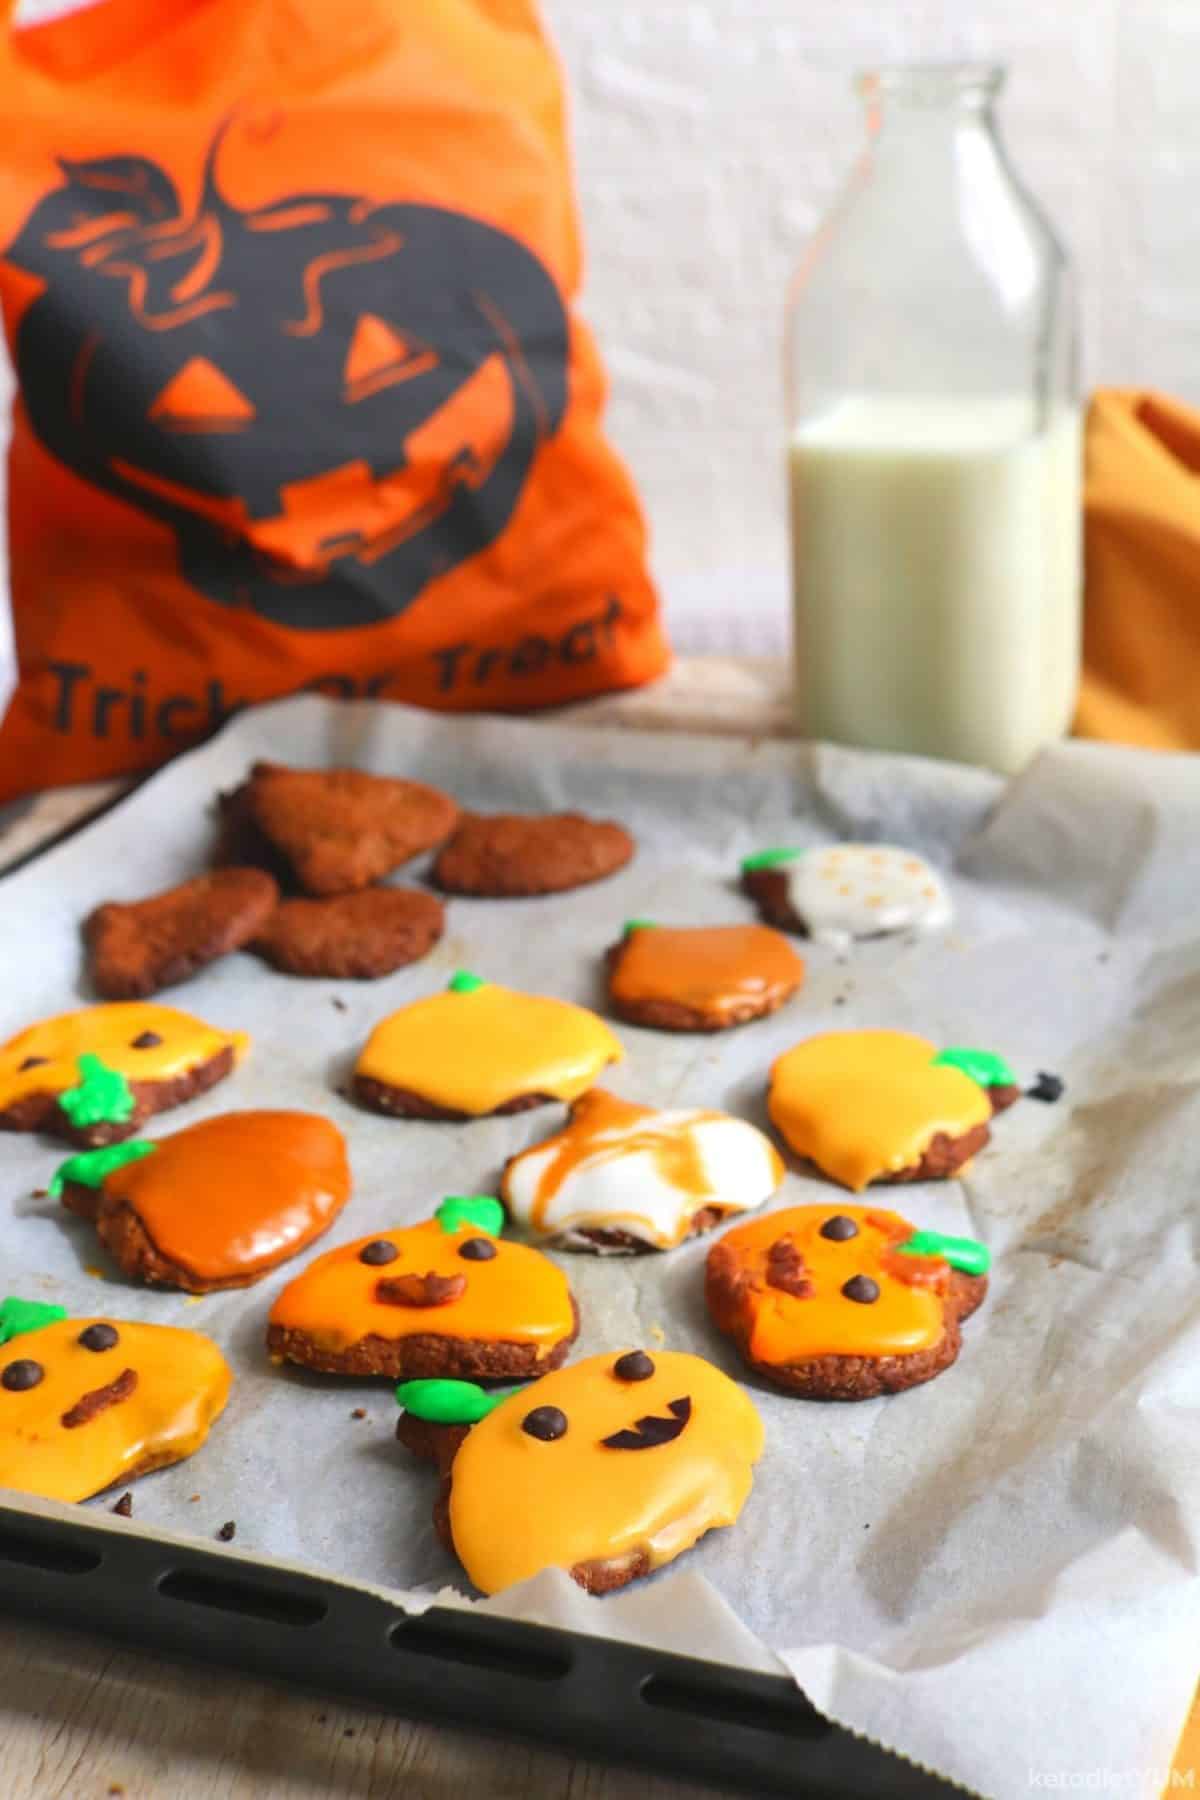 Halloween keto pumpkin cookies with different colored icings ready to enjoy